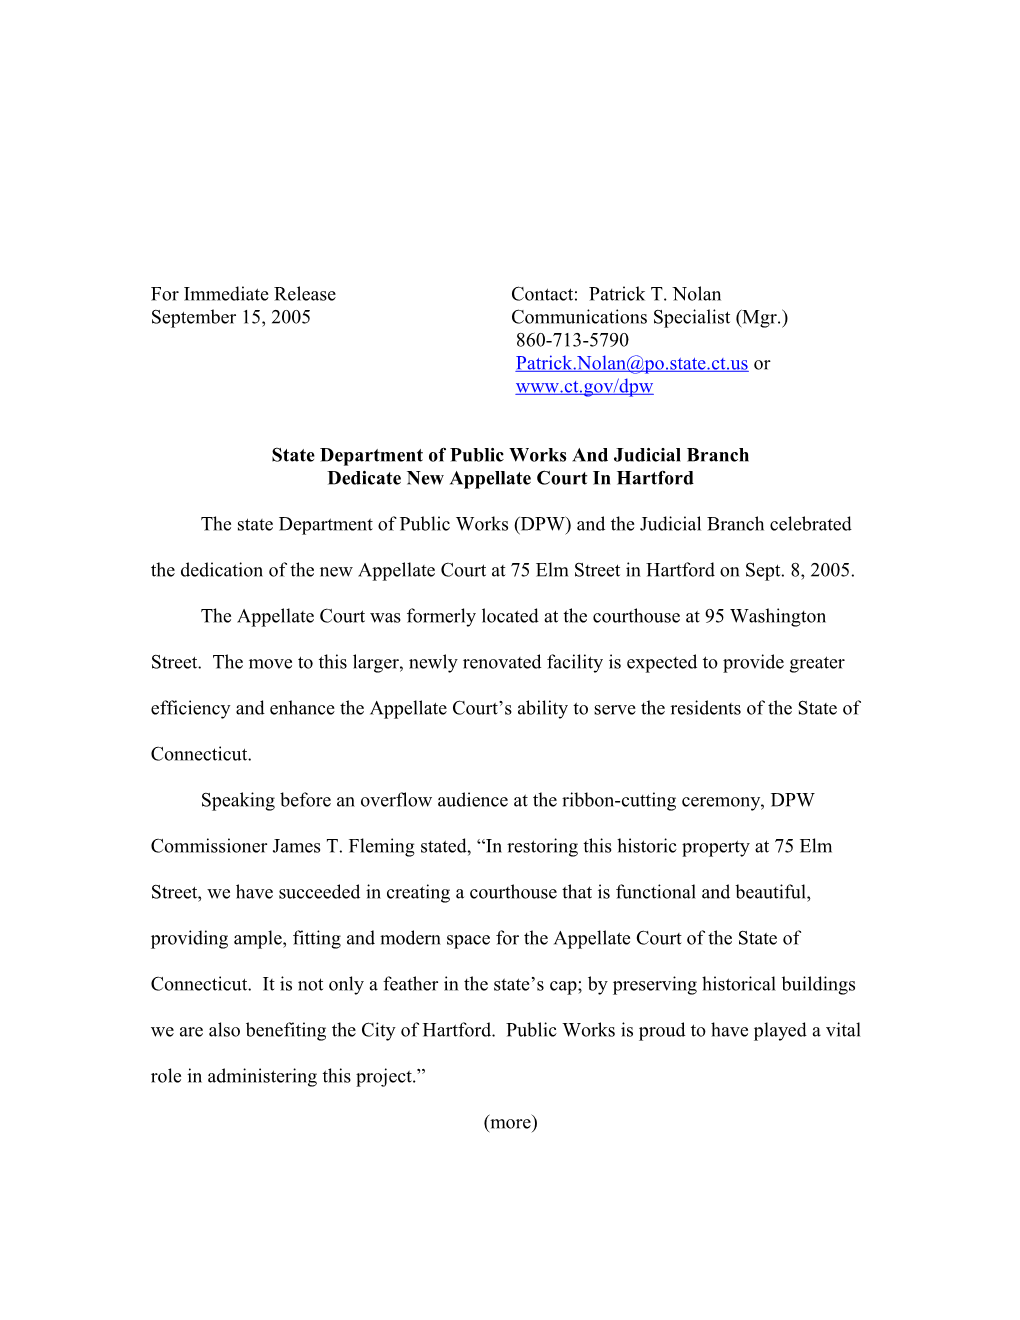 Appellate Court Press Release